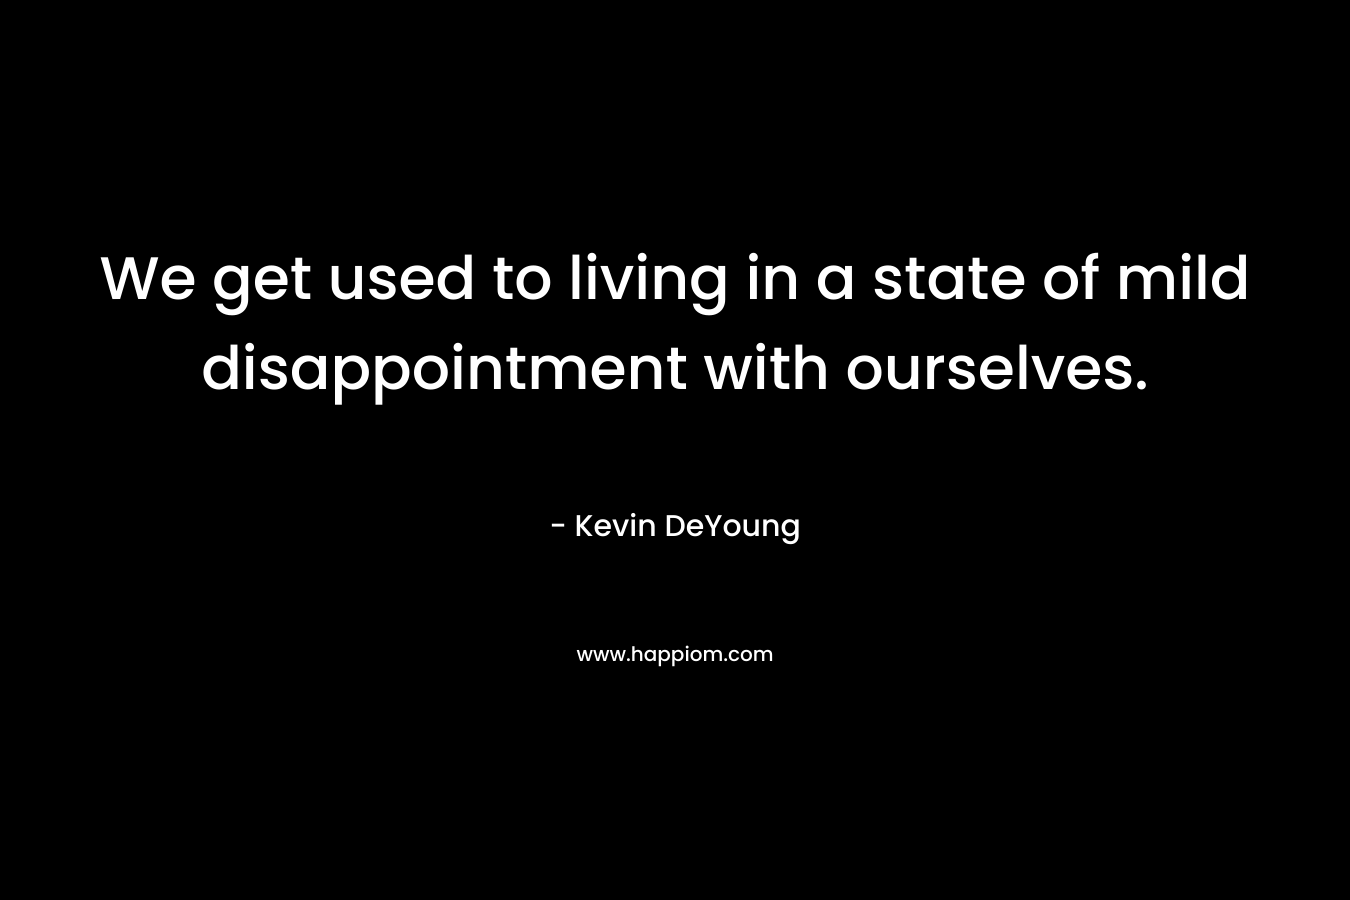 We get used to living in a state of mild disappointment with ourselves. – Kevin DeYoung